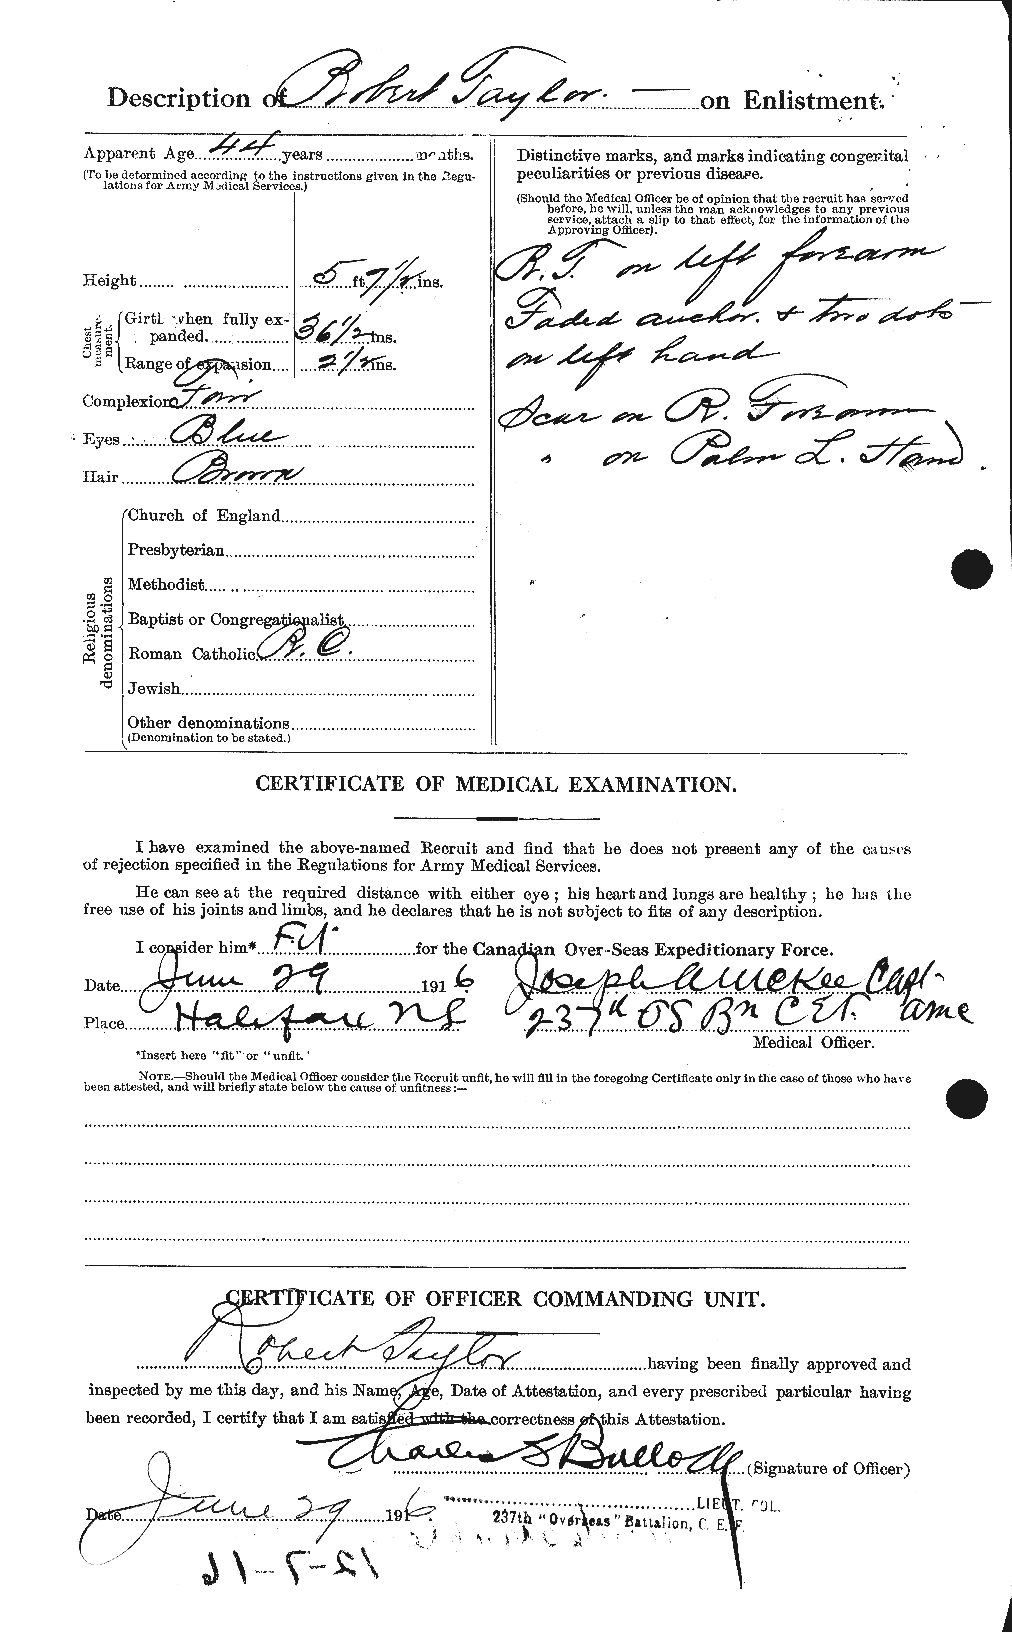 Personnel Records of the First World War - CEF 627489b